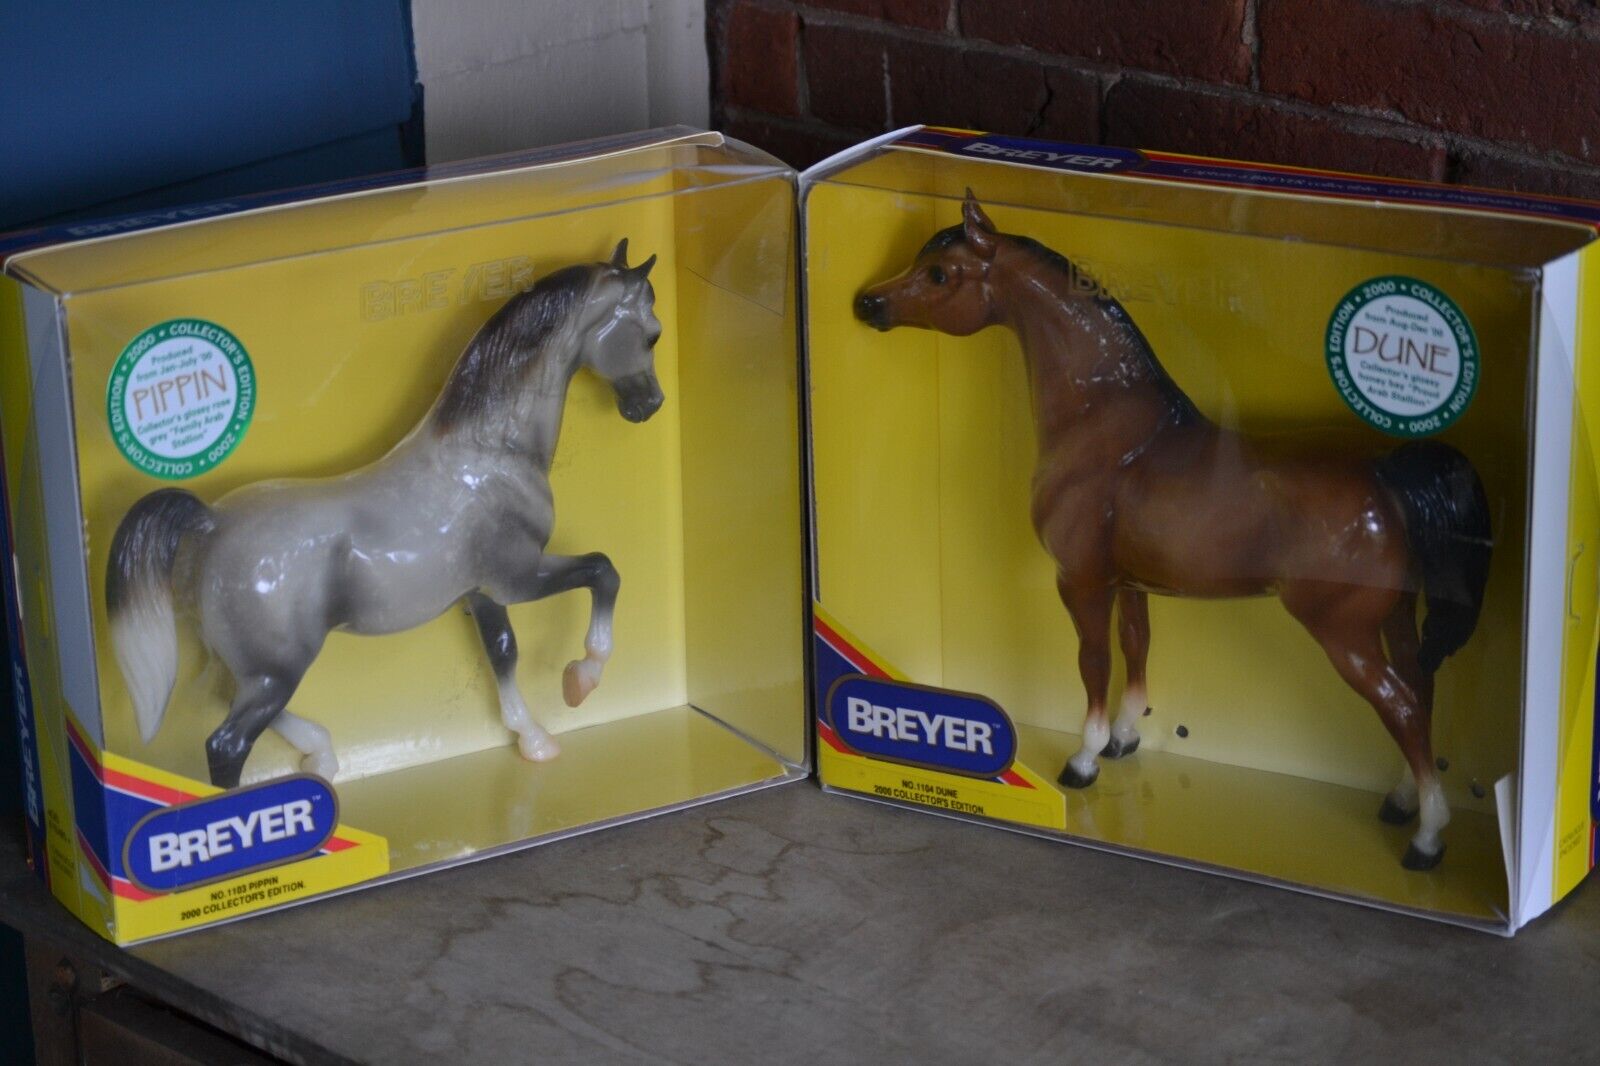 SET Breyer 1104 Dune and 1103 Pippin Collectors Semi-glossy Boxes Inc Displayed*